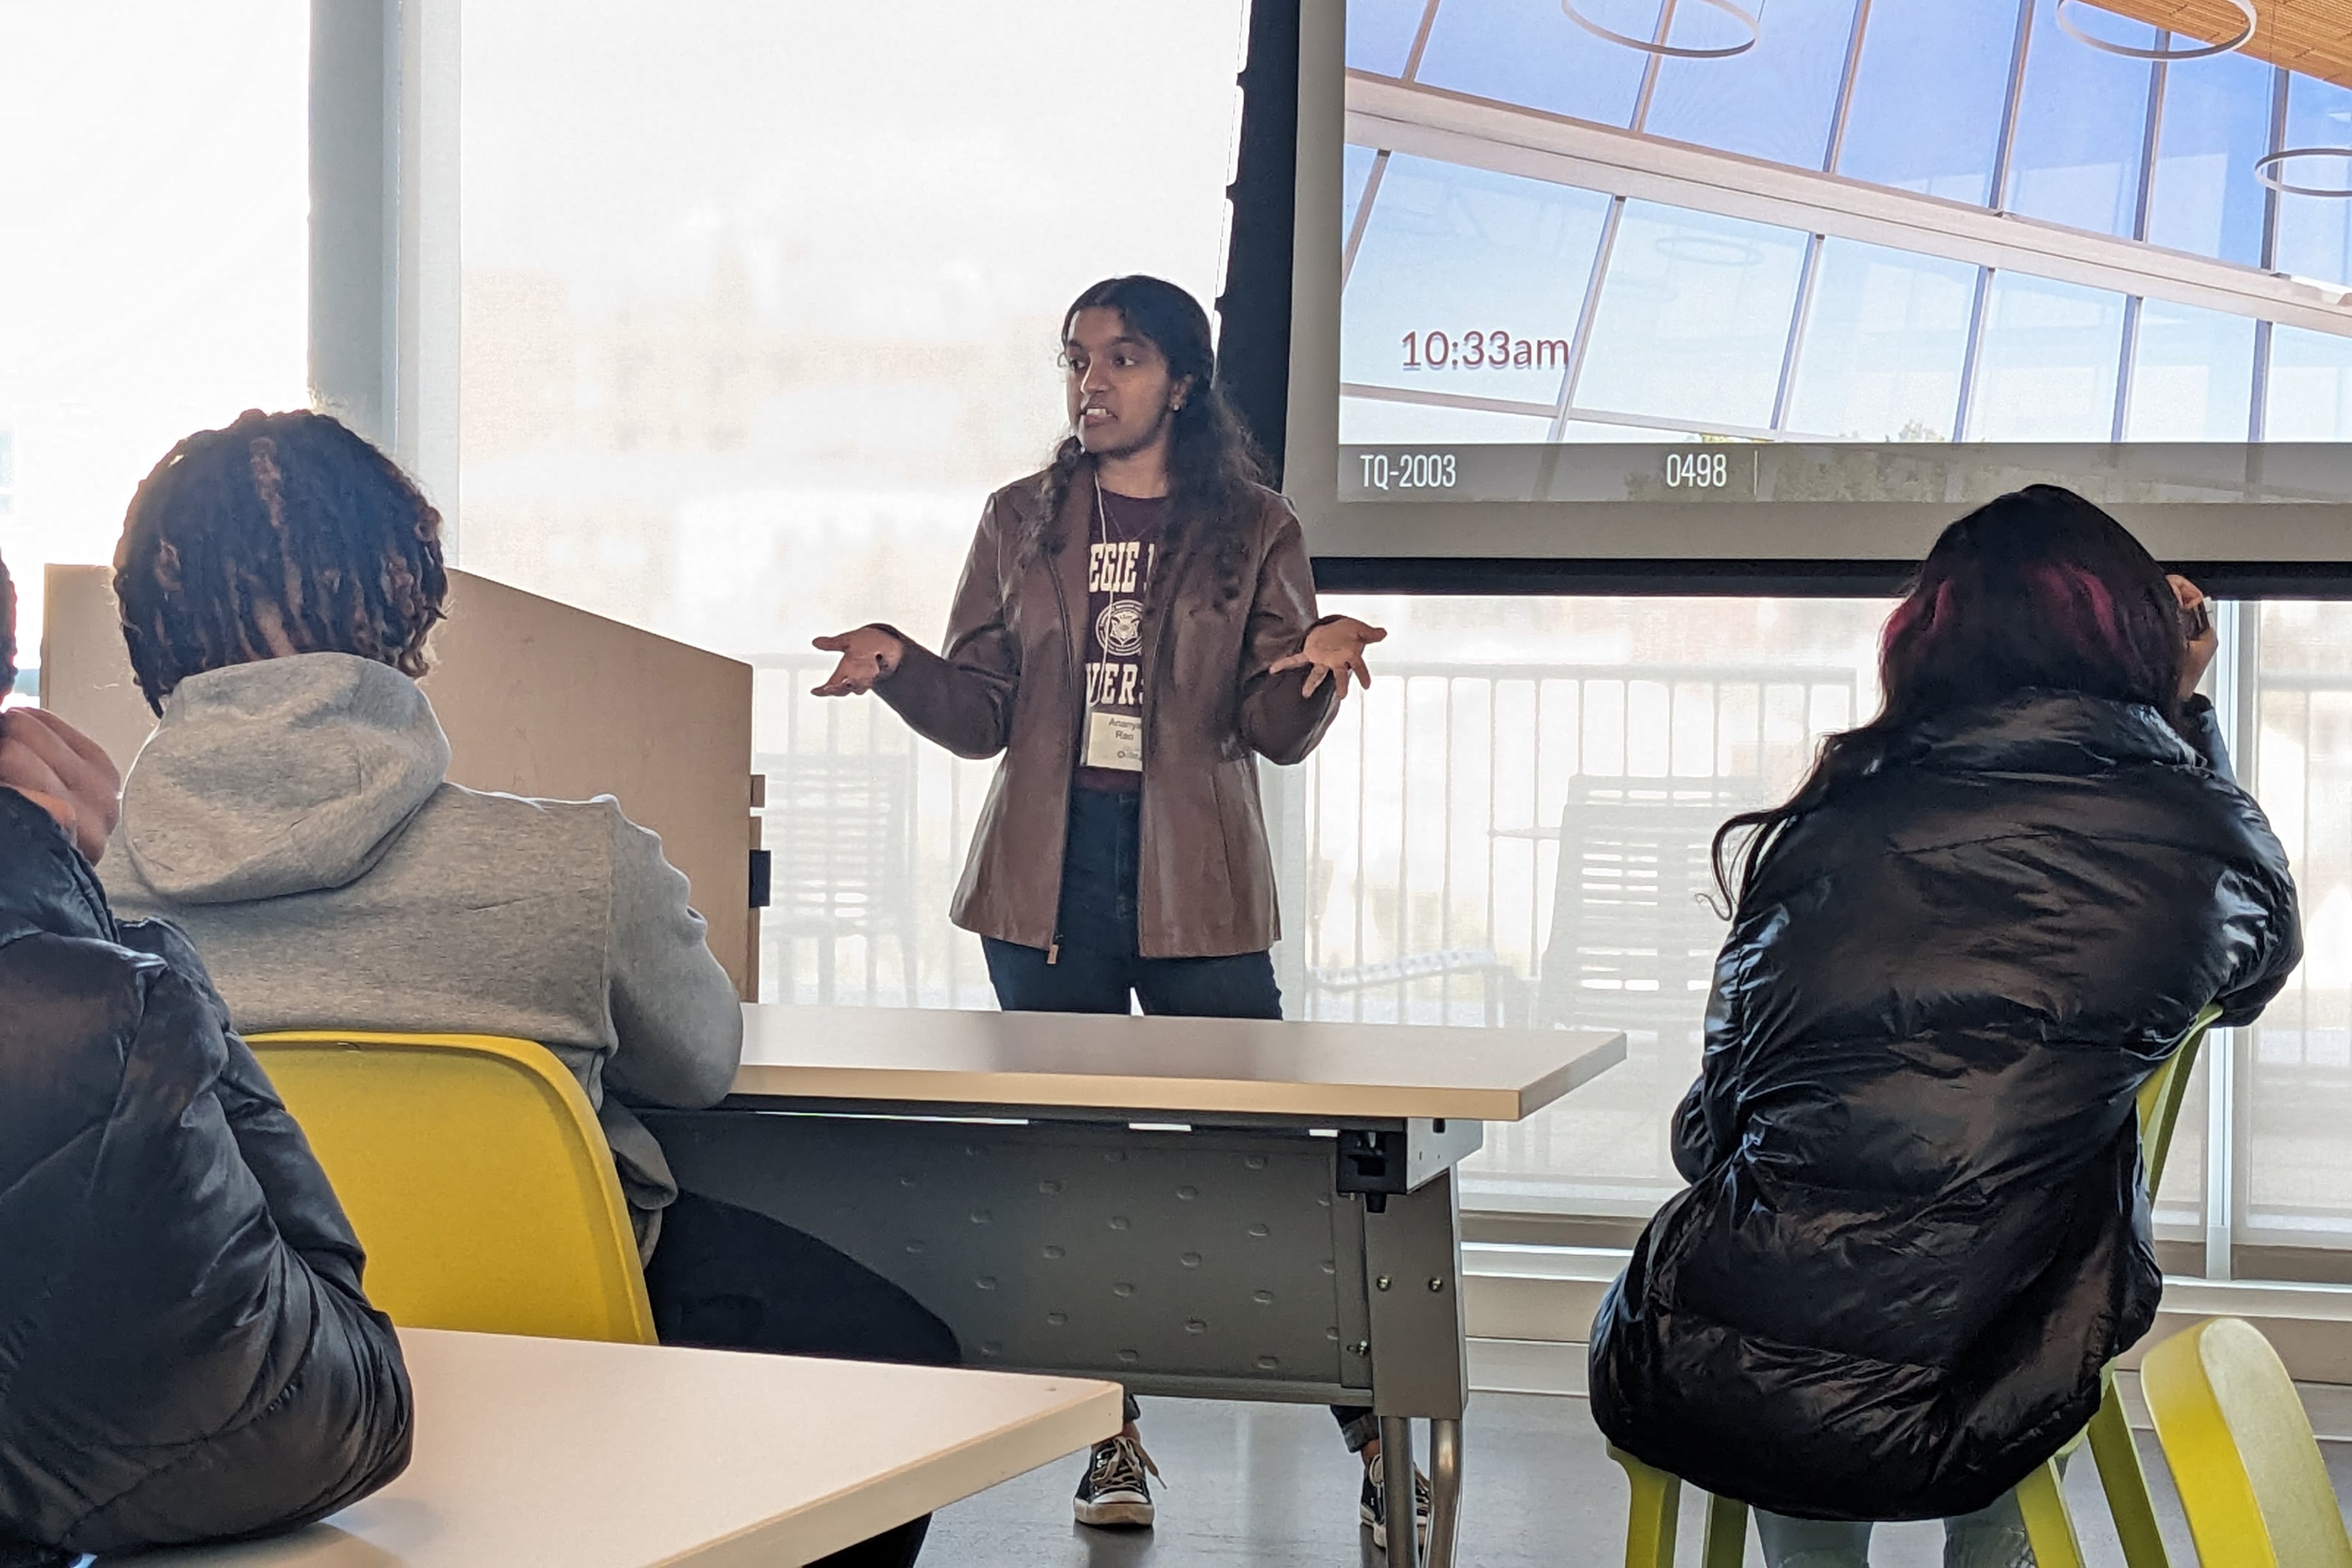 AI-SDM student participating in an outreach event by giving a lecture to high school students